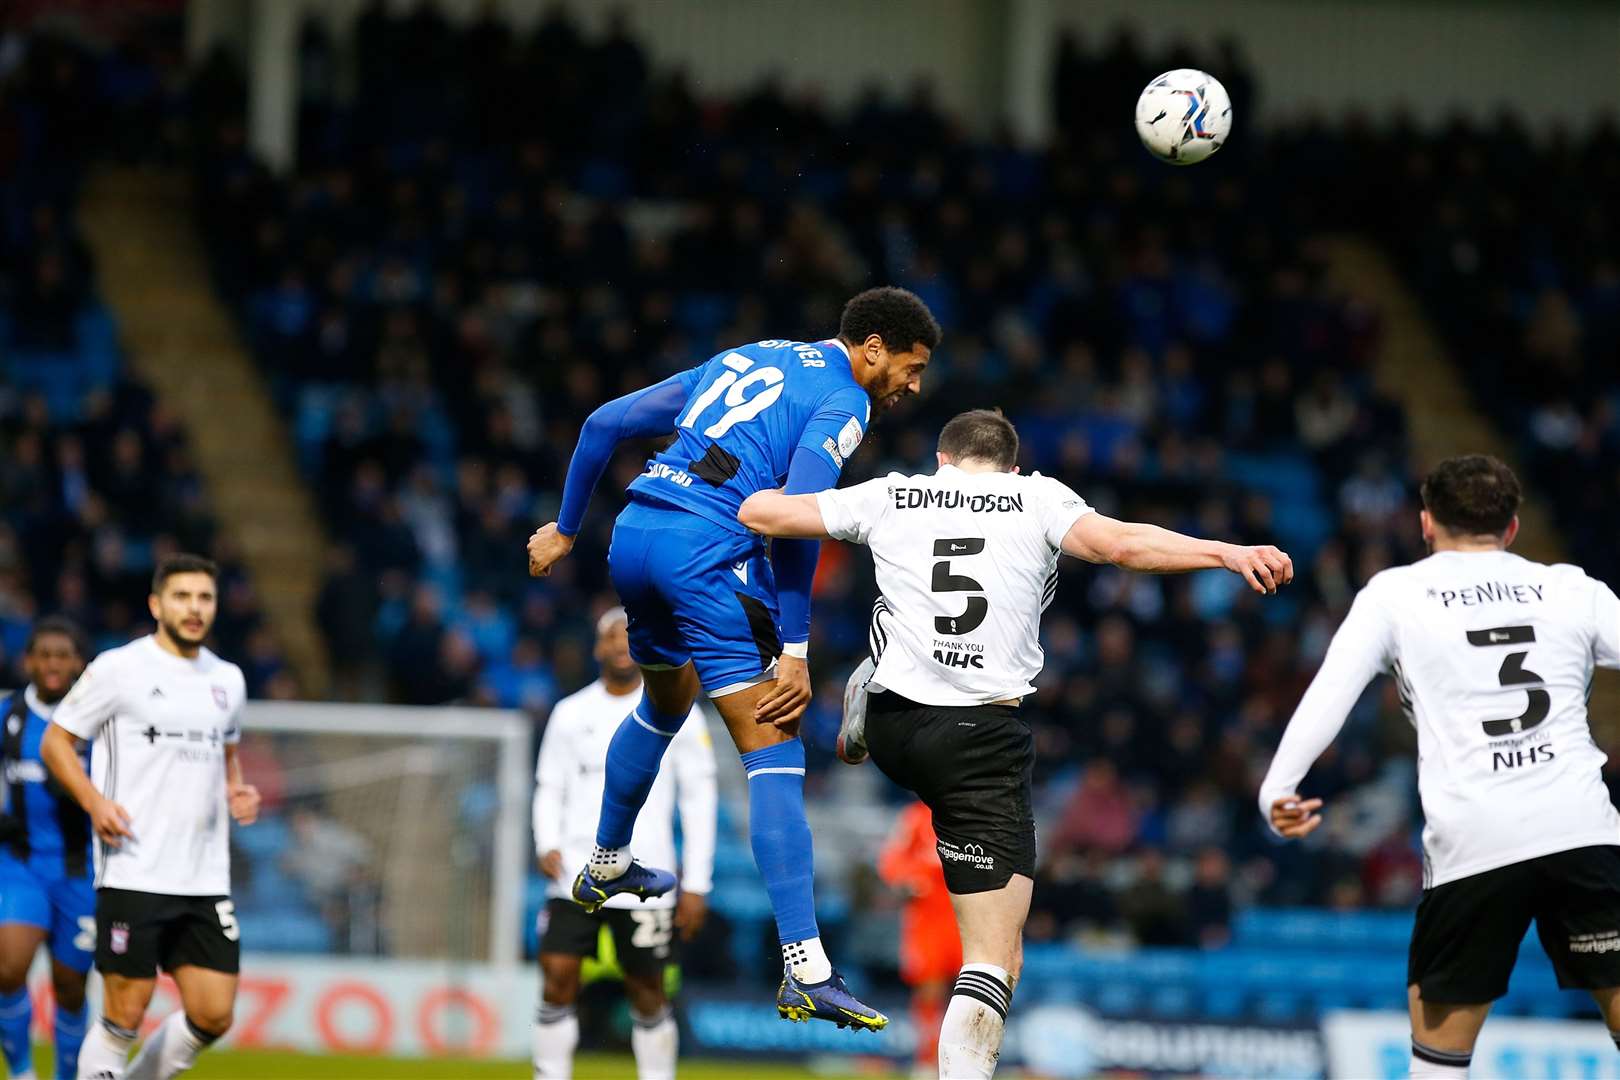 Gillingham forward Vadaine Oliver challenges in the air Picture: Andy Jones